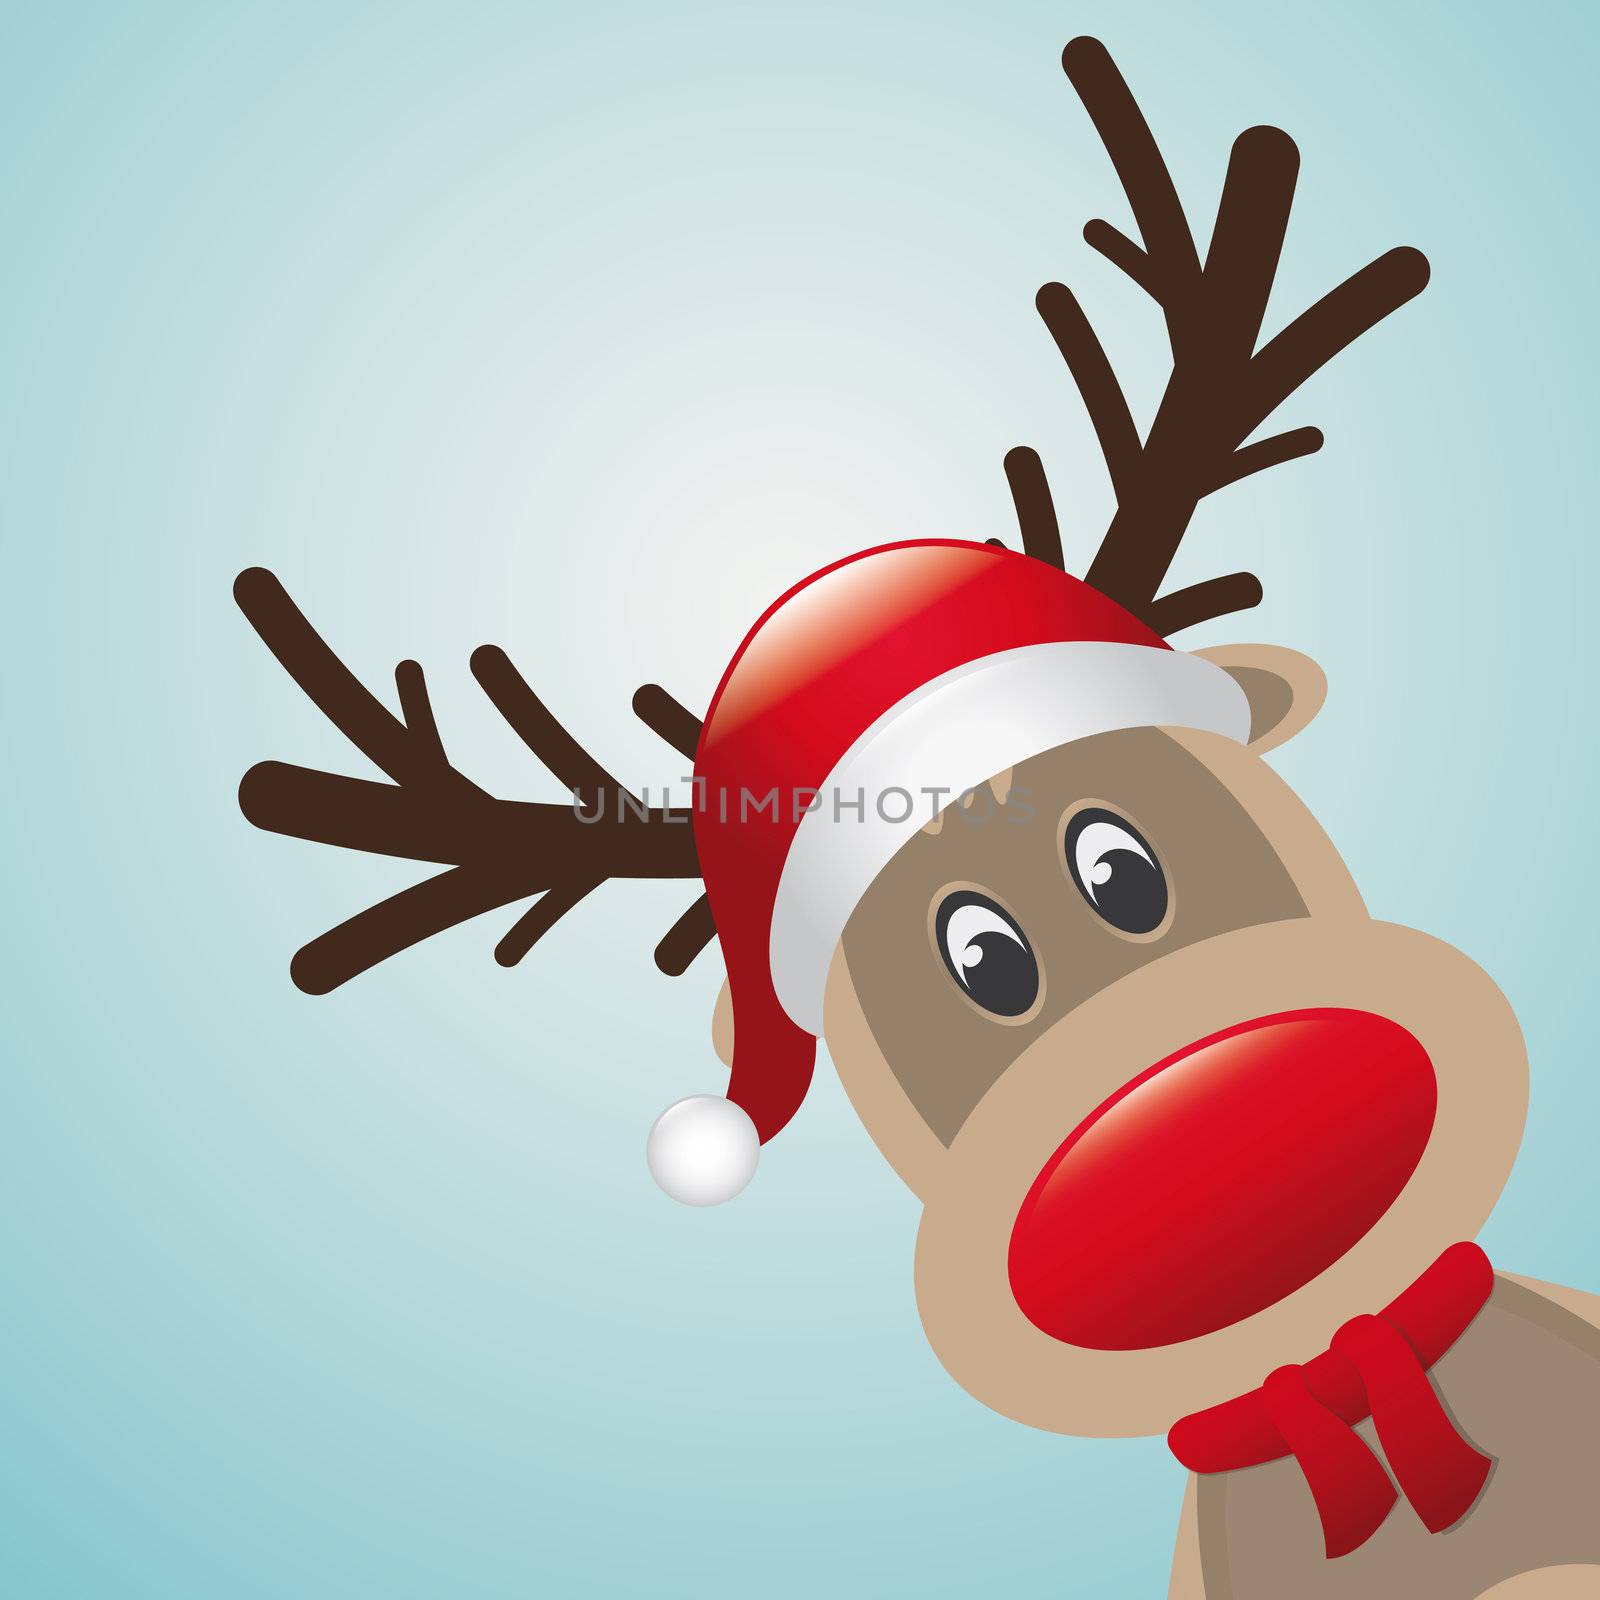 rudolph reindeer red nose and hat scarf